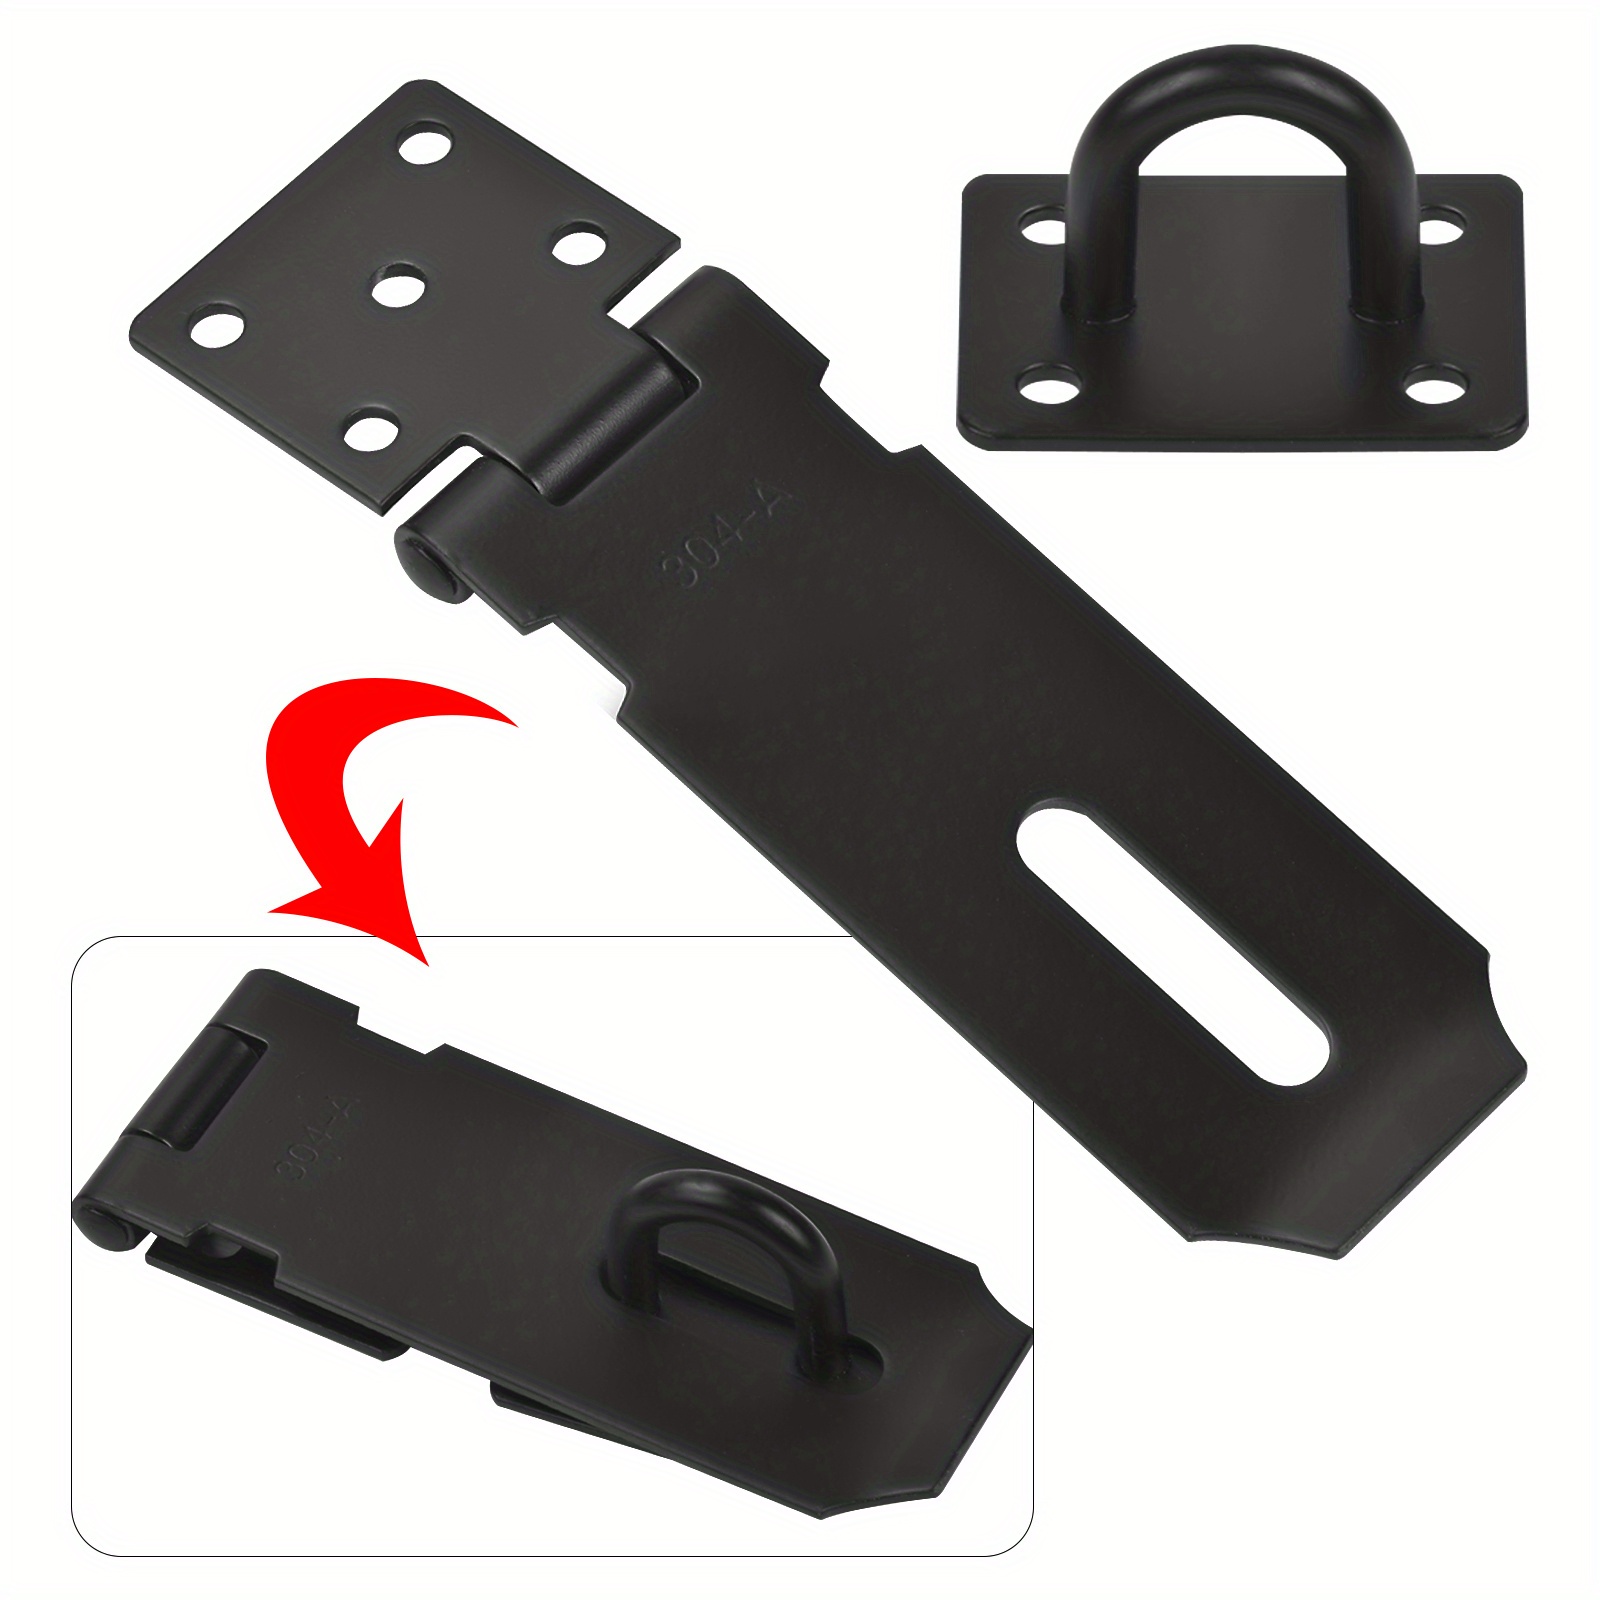 

Heavy Duty Stainless Steel Door Padlock Hasp Sets Securing Your Home